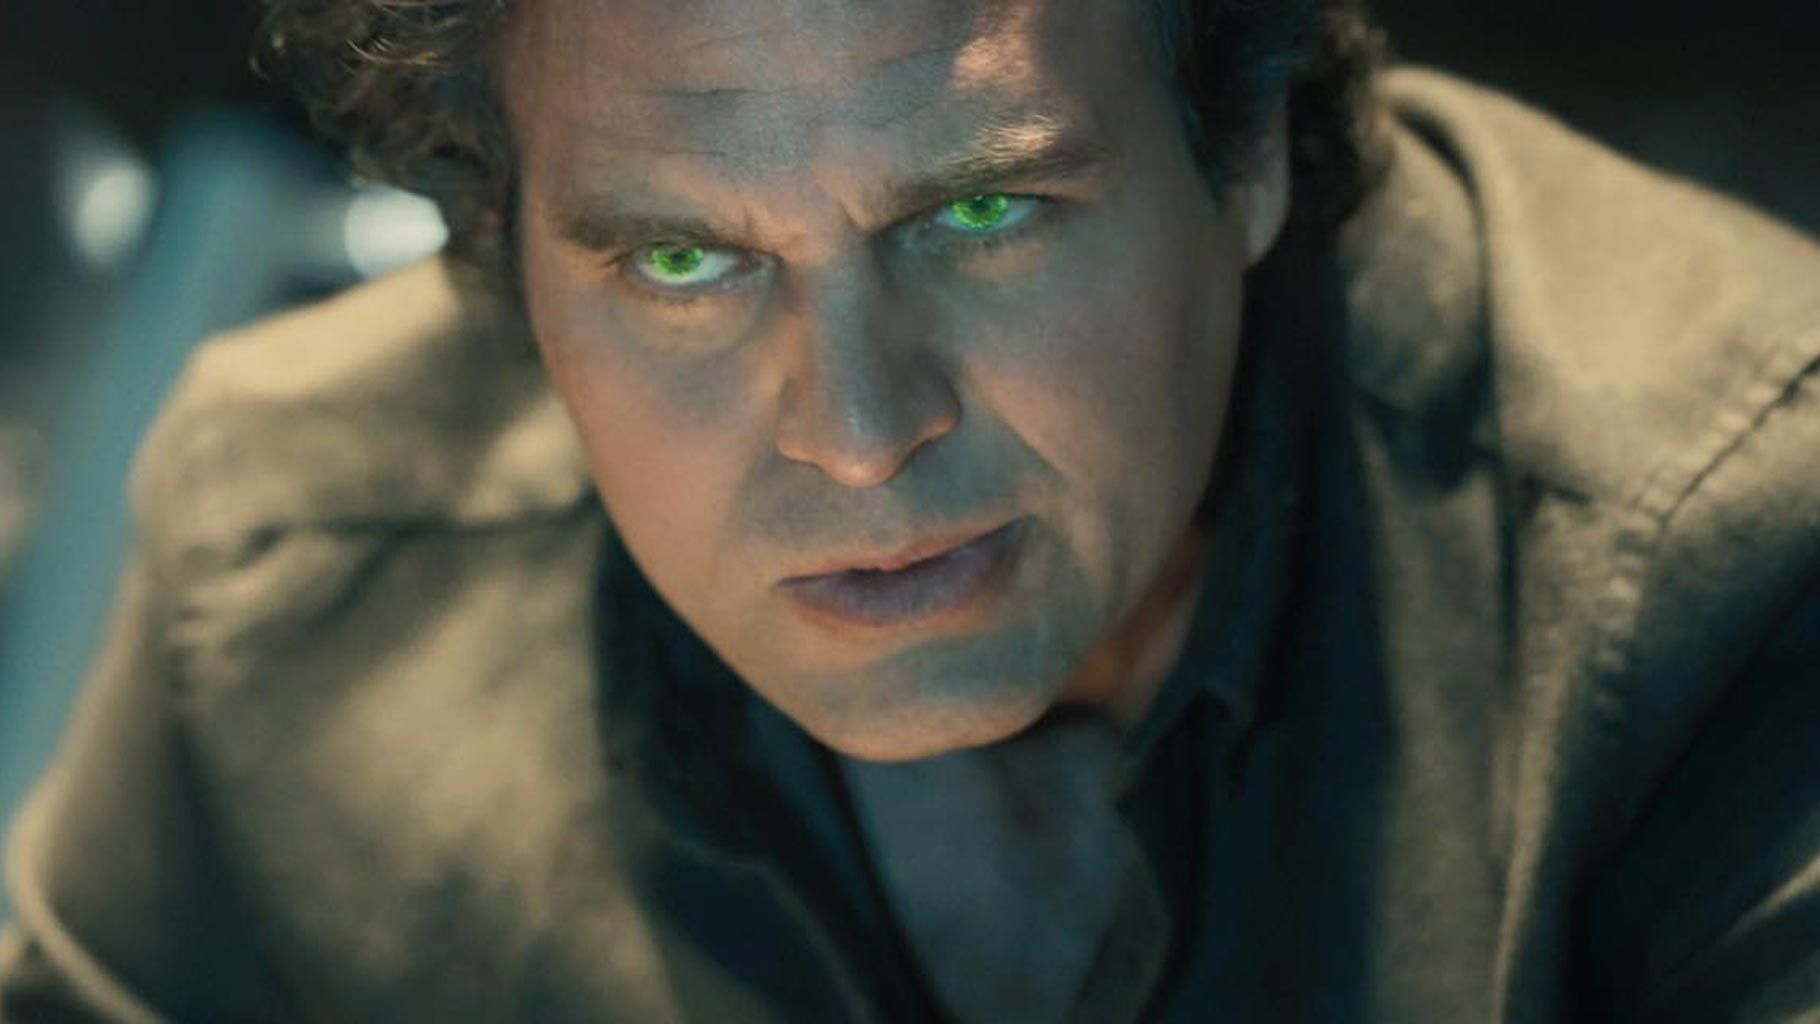 Mark Ruffalo as the Hulk in Avengers: The Age of Ultron. (Photo: Facebook Page of <a href="https://www.facebook.com/Hulk/photos/pb.21700332856.-2207520000.1451083473./10153170037977857/?type=3&amp;theater">The Incredible Hulk</a>)